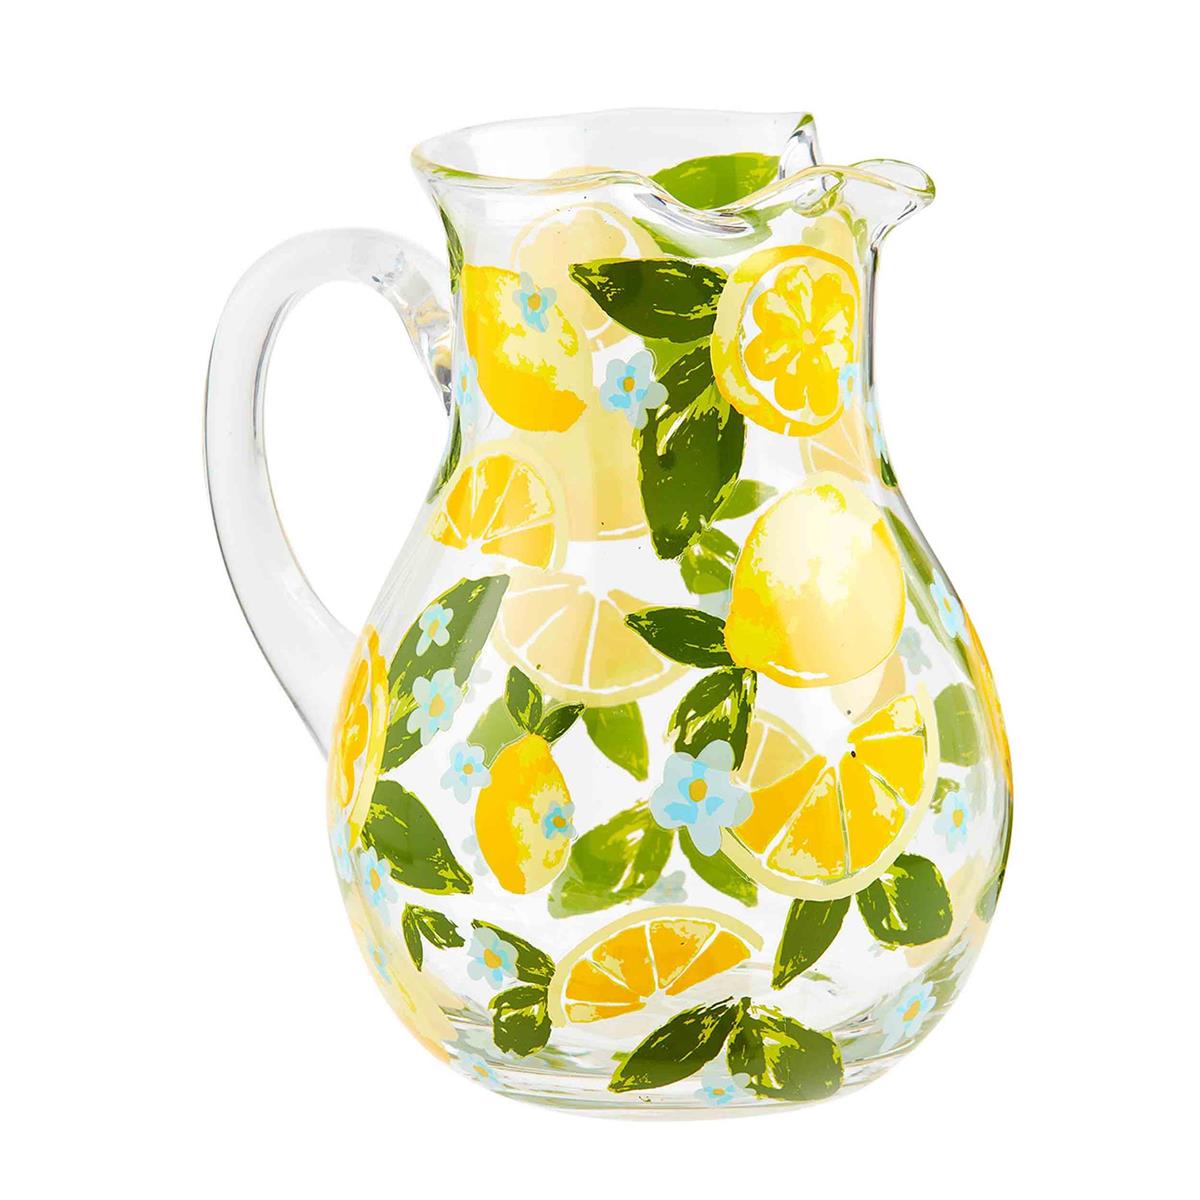 lemon pitcher is clear glass with lemons, leaves, and small blue flowers all over it on a white background